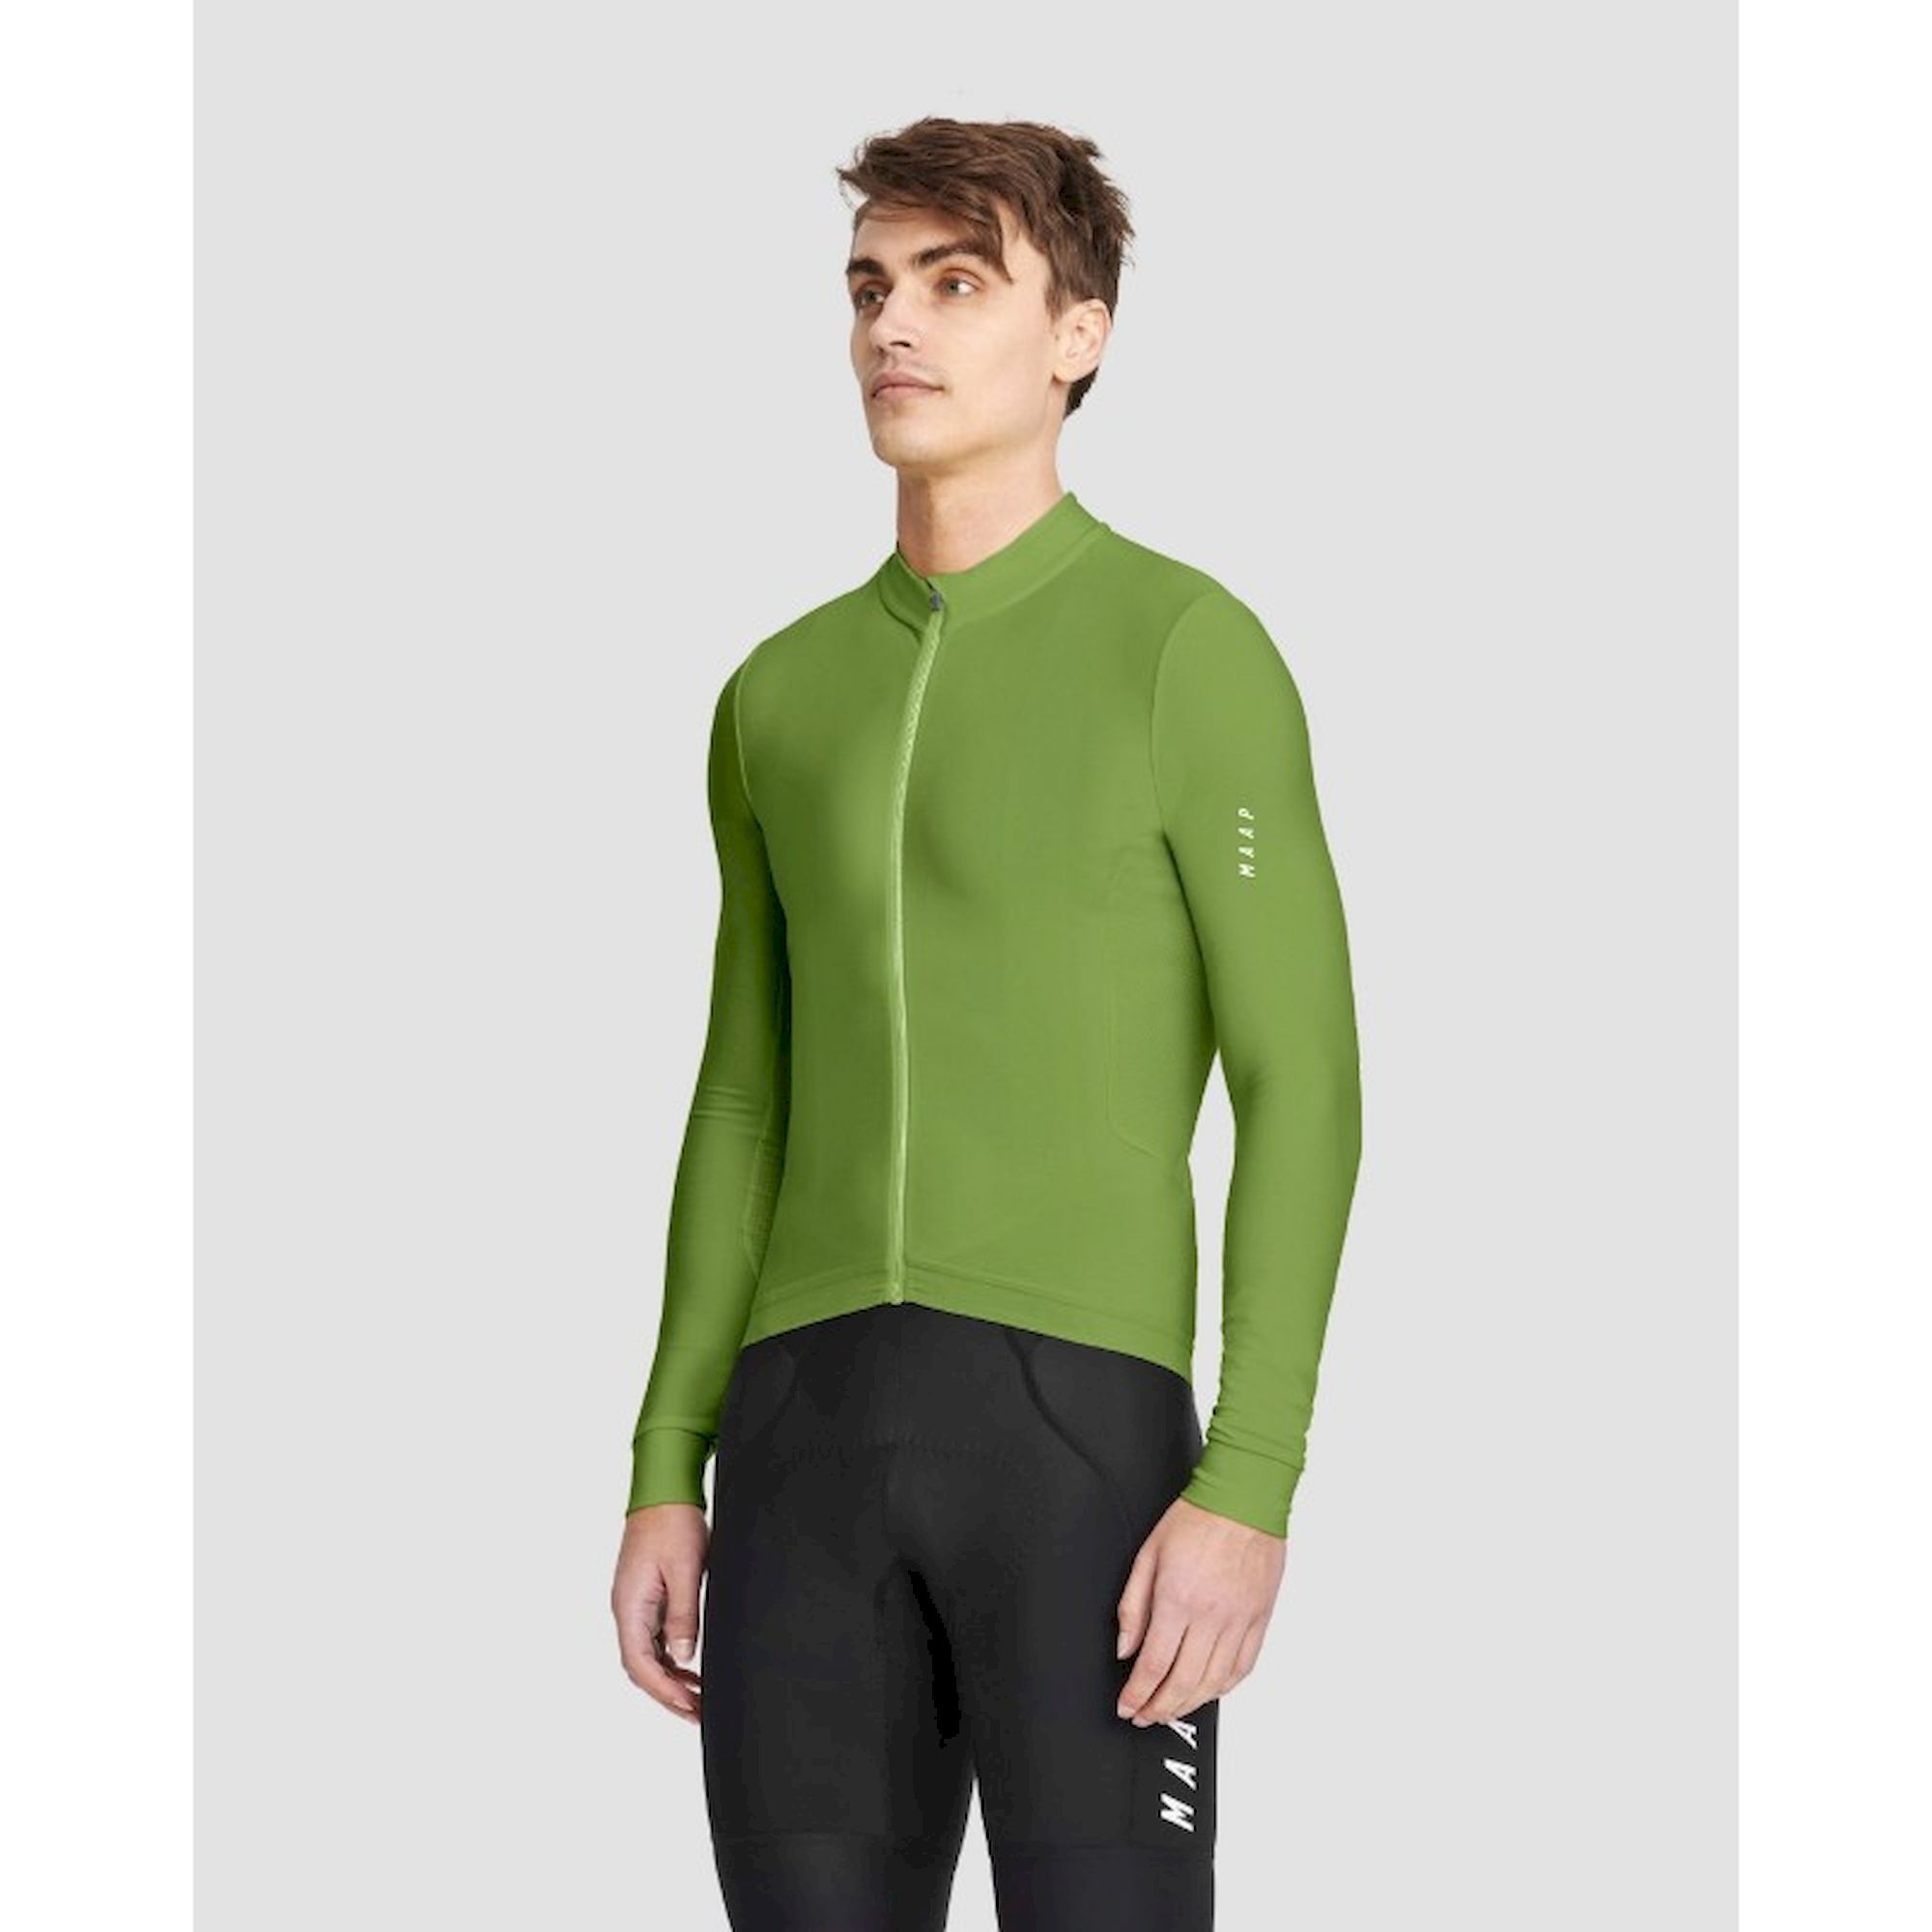 Maap Force LS Jersey - Maillot vélo homme | Hardloop